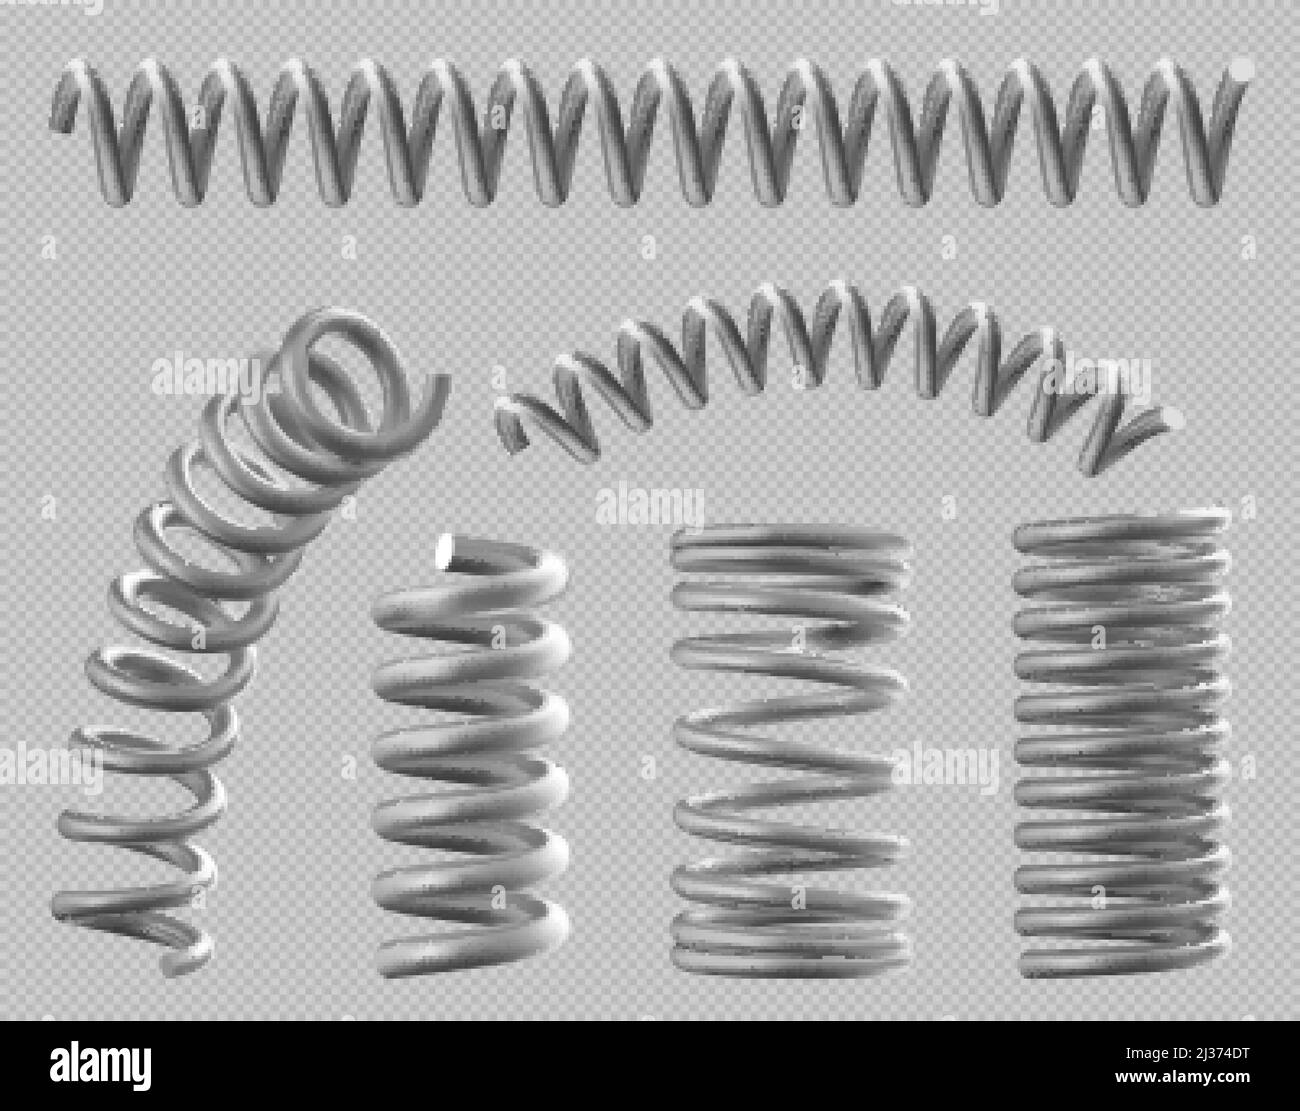 Metal springs, realistic coils for bed or car, flexible spiral parts set isolated on transparent background. Steel industrial or mechanic garage equip Stock Vector